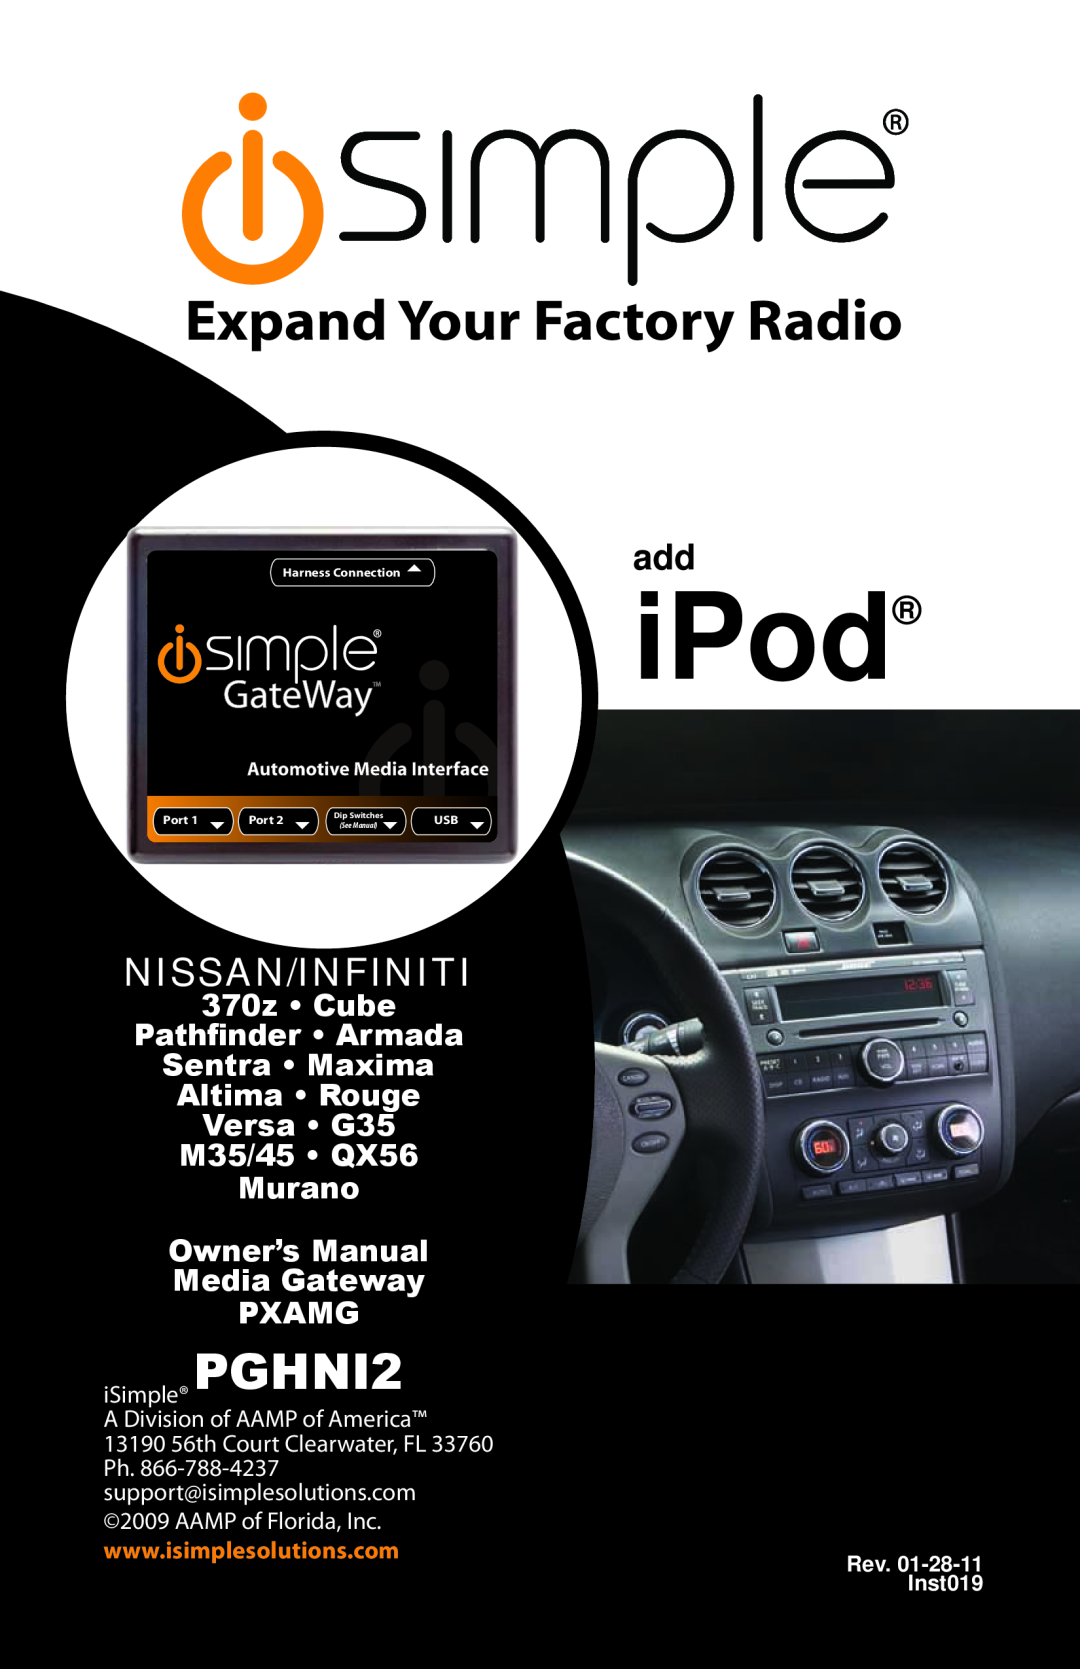 iSimple PGHNI2 owner manual iPod, Expand Your Factory Radio, Nissan/Infiniti, Altima Rouge Versa G35 M35/45 QX56 Murano 